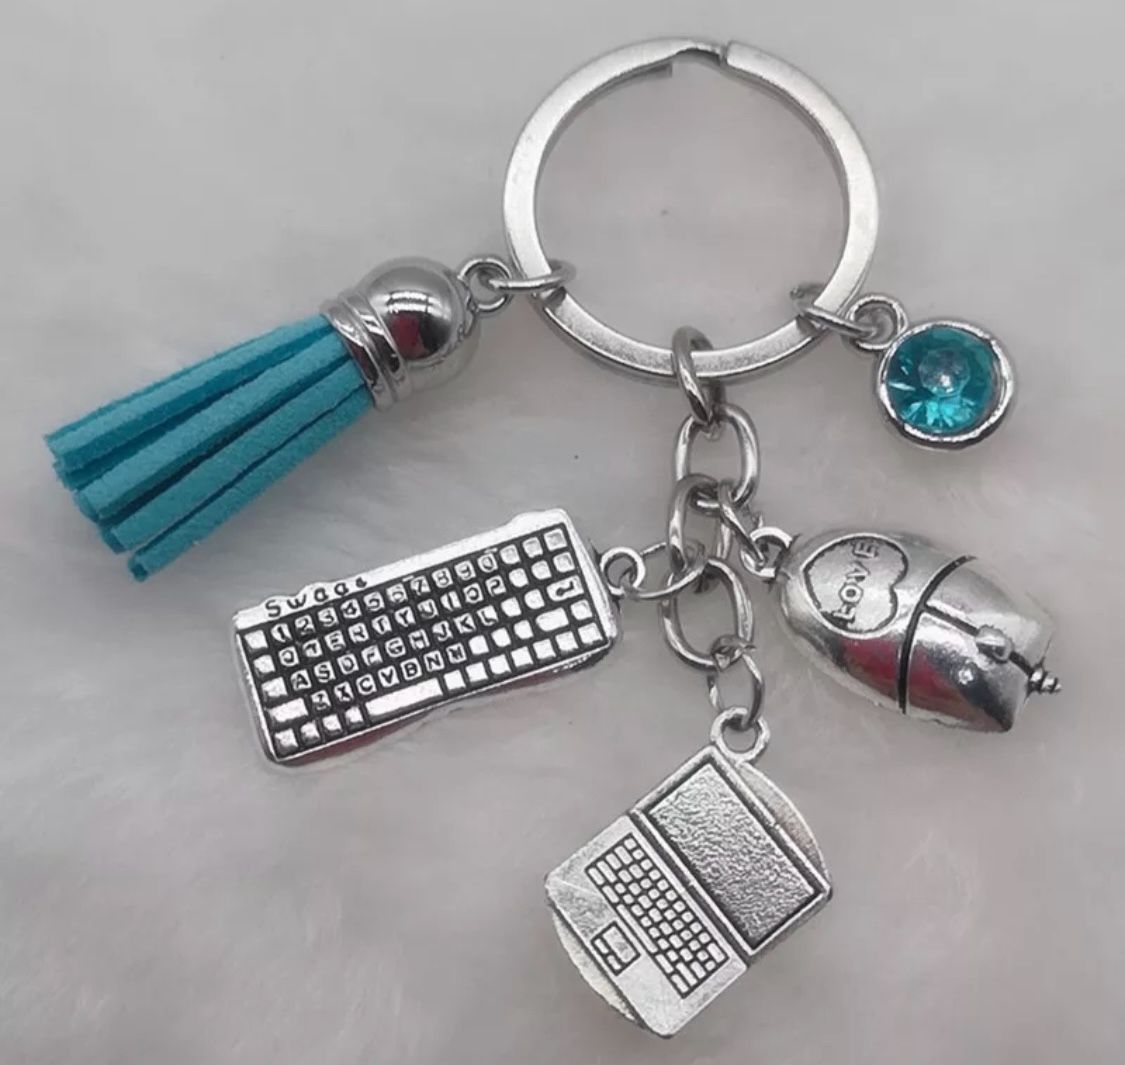 Brand New Office Assistant Secretary Manager Charms Keychain Gift - Blue Tassel 